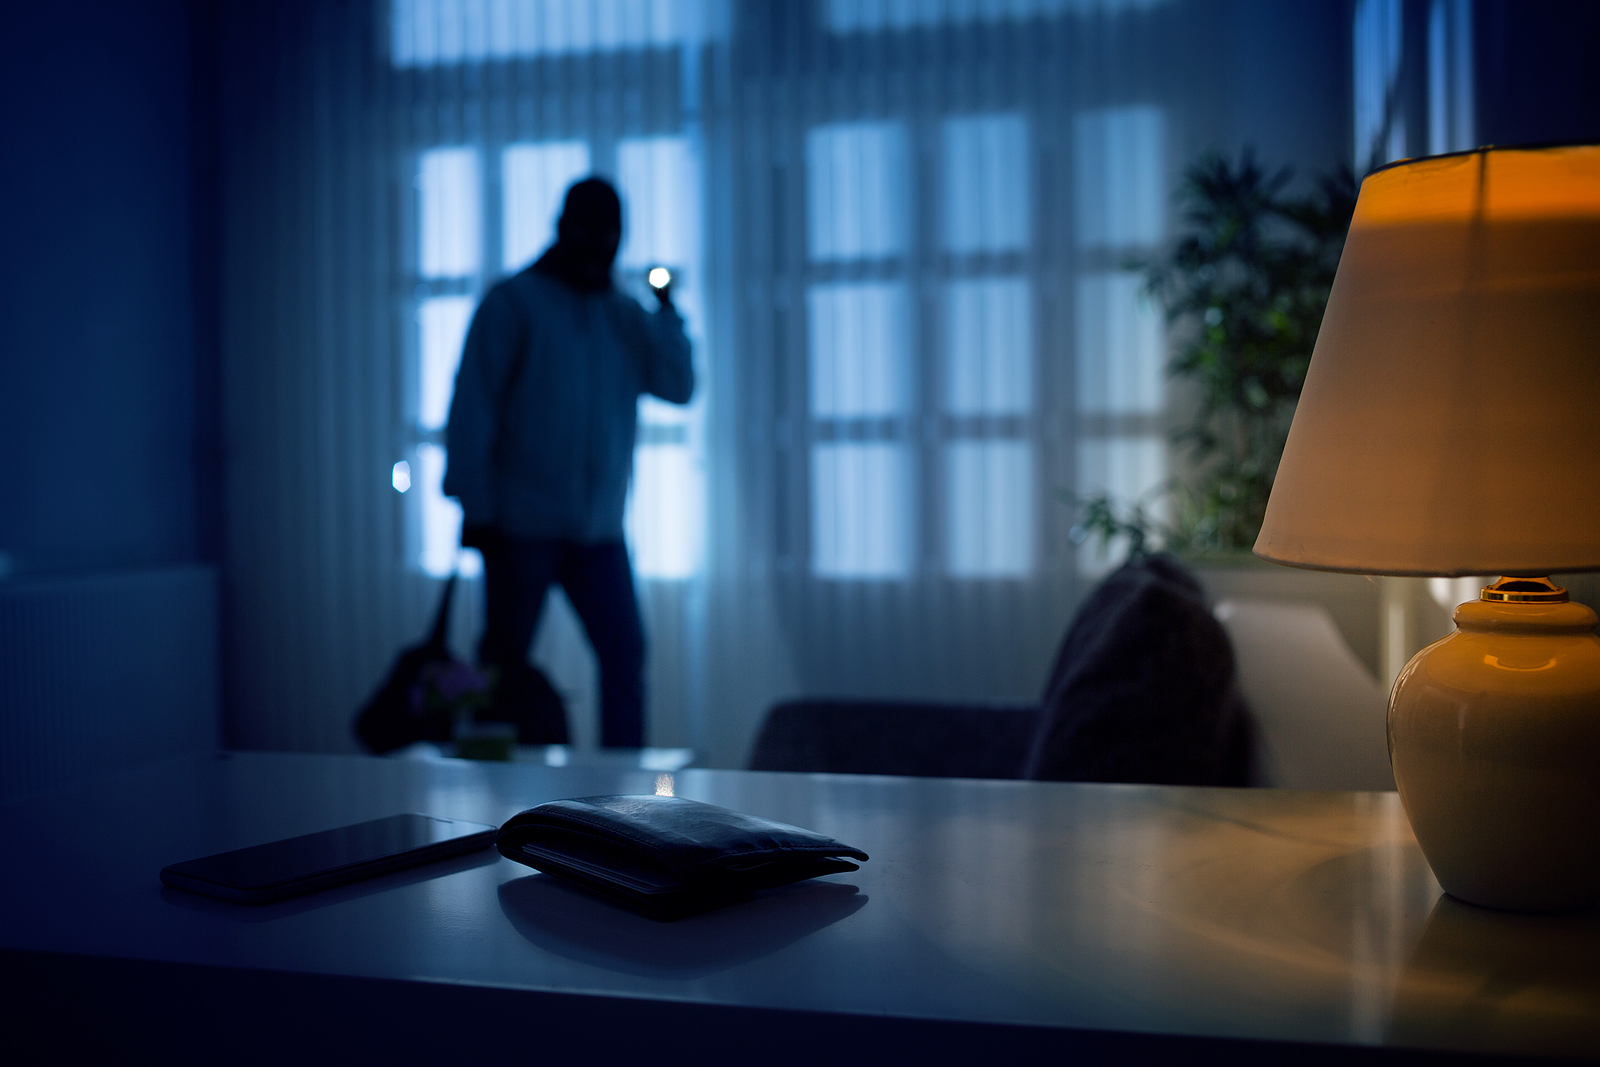 Burglar or intruder inside of a house or office with flashlight.